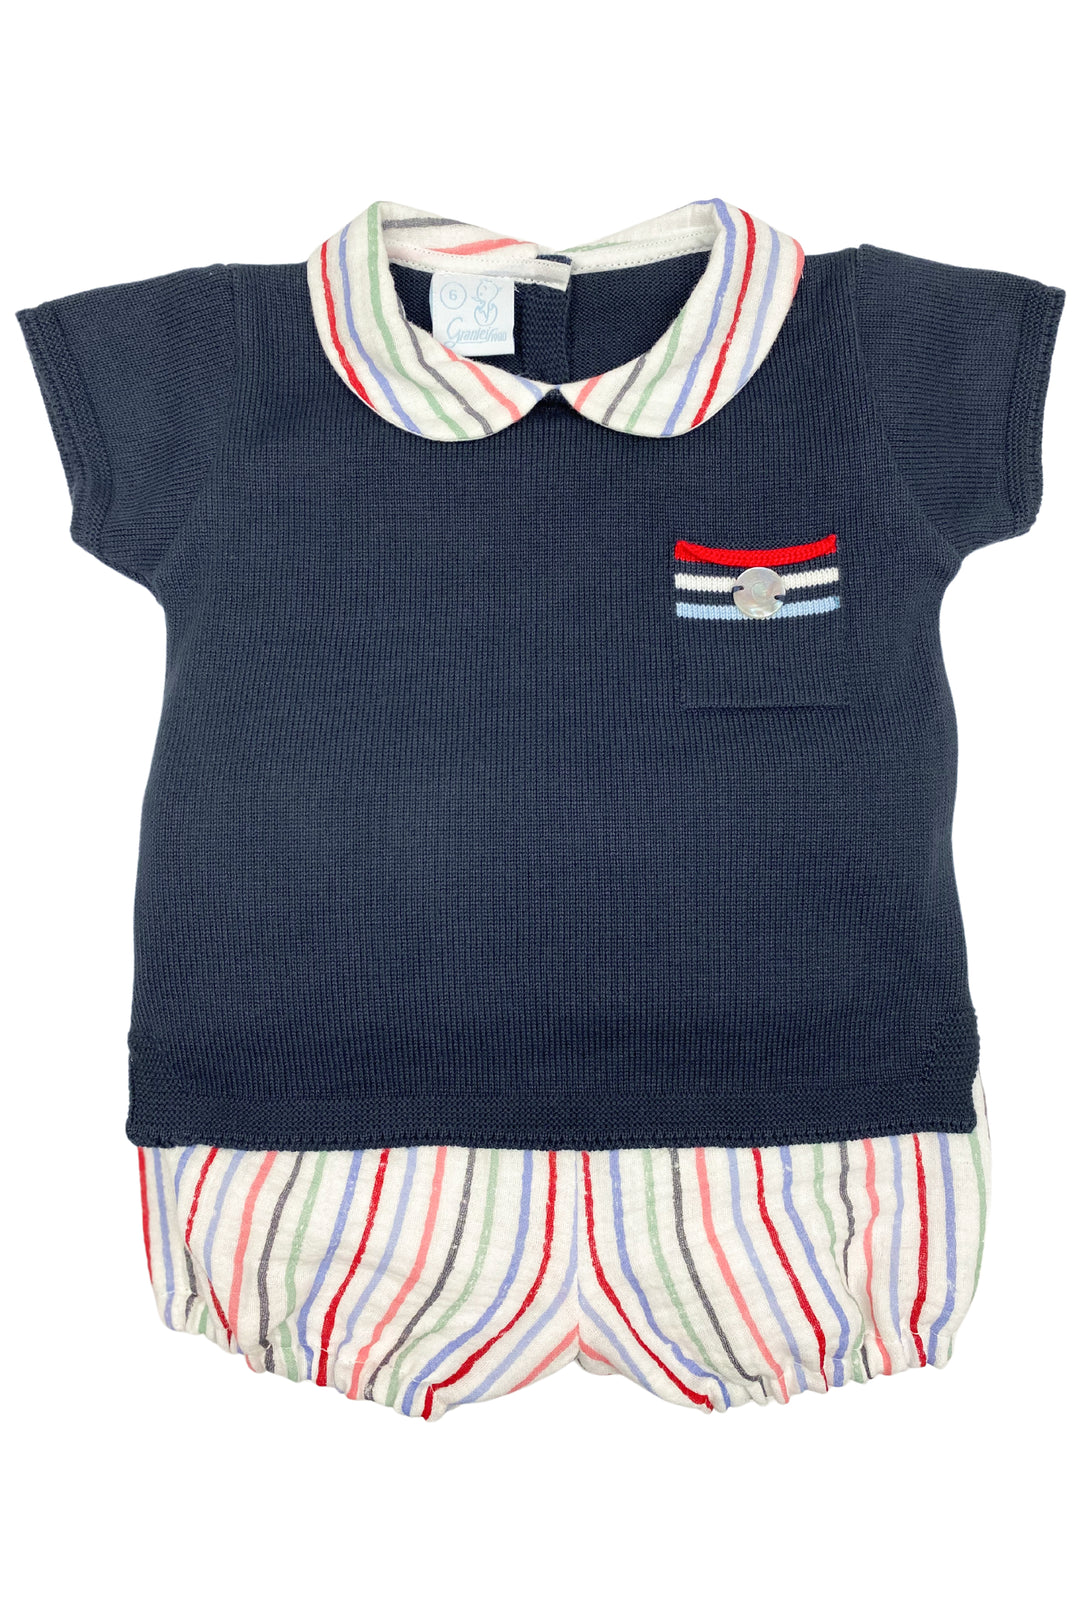 Granlei "Nico" Navy Knit Top & Striped Jam Pants | iphoneandroidapplications